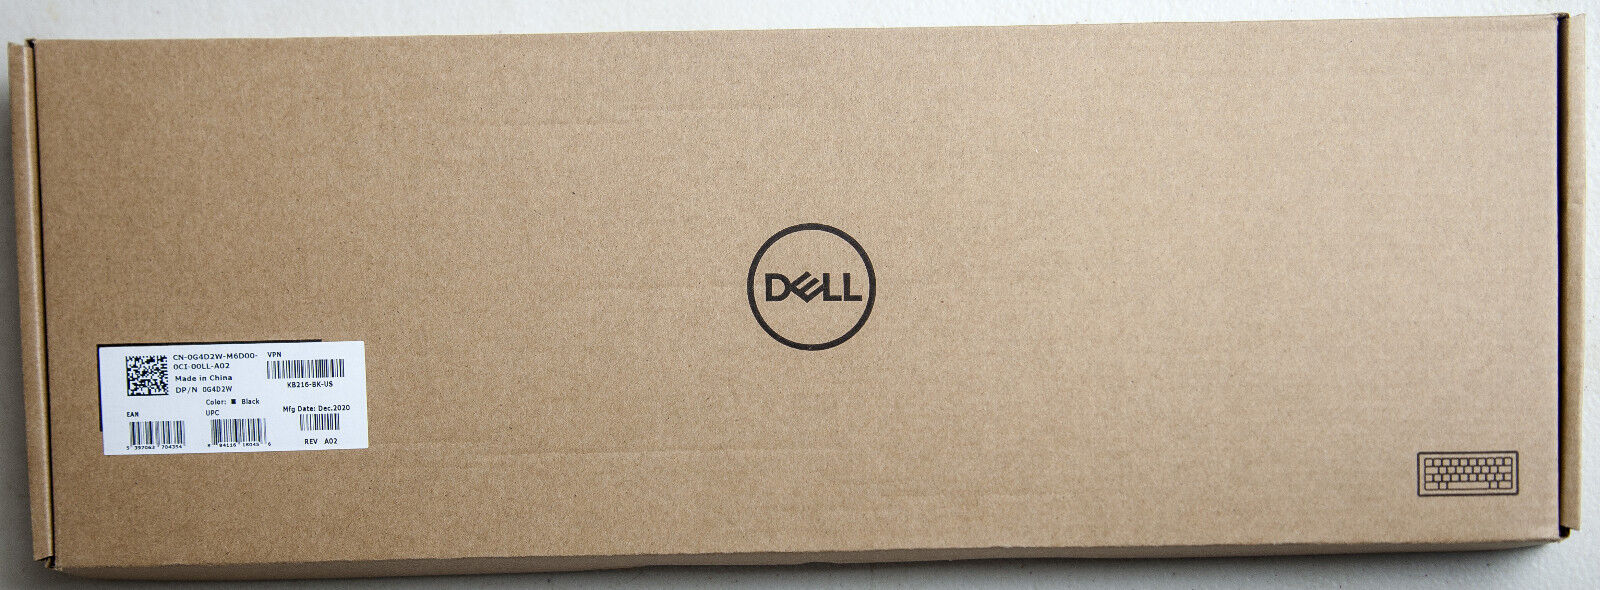 DELL Black Wired USB Keyboard - BRAND NEW - Get 1 or BUNDLE for a BULK DISCOUNT